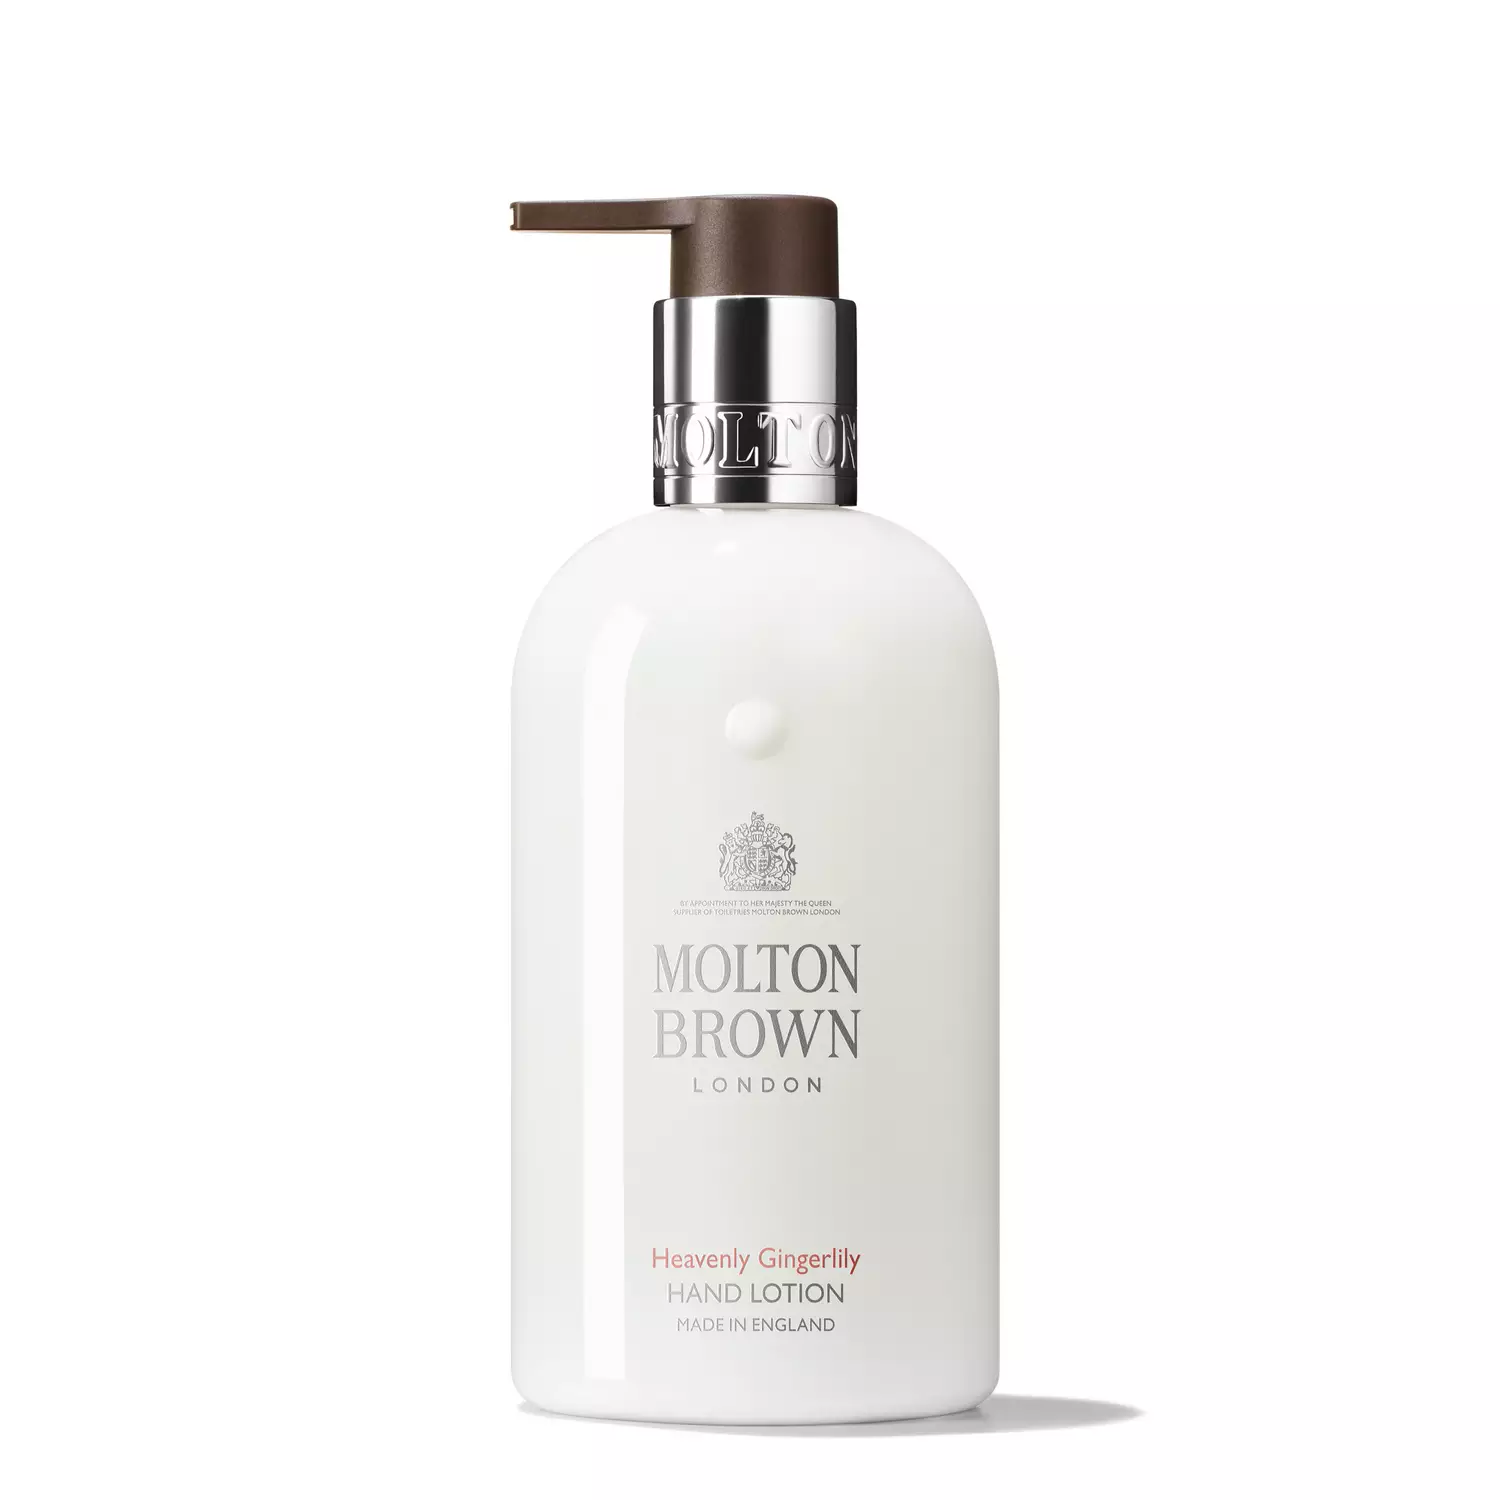 Molton Brown - Heavenly Gingerlily - Hand Lotion 